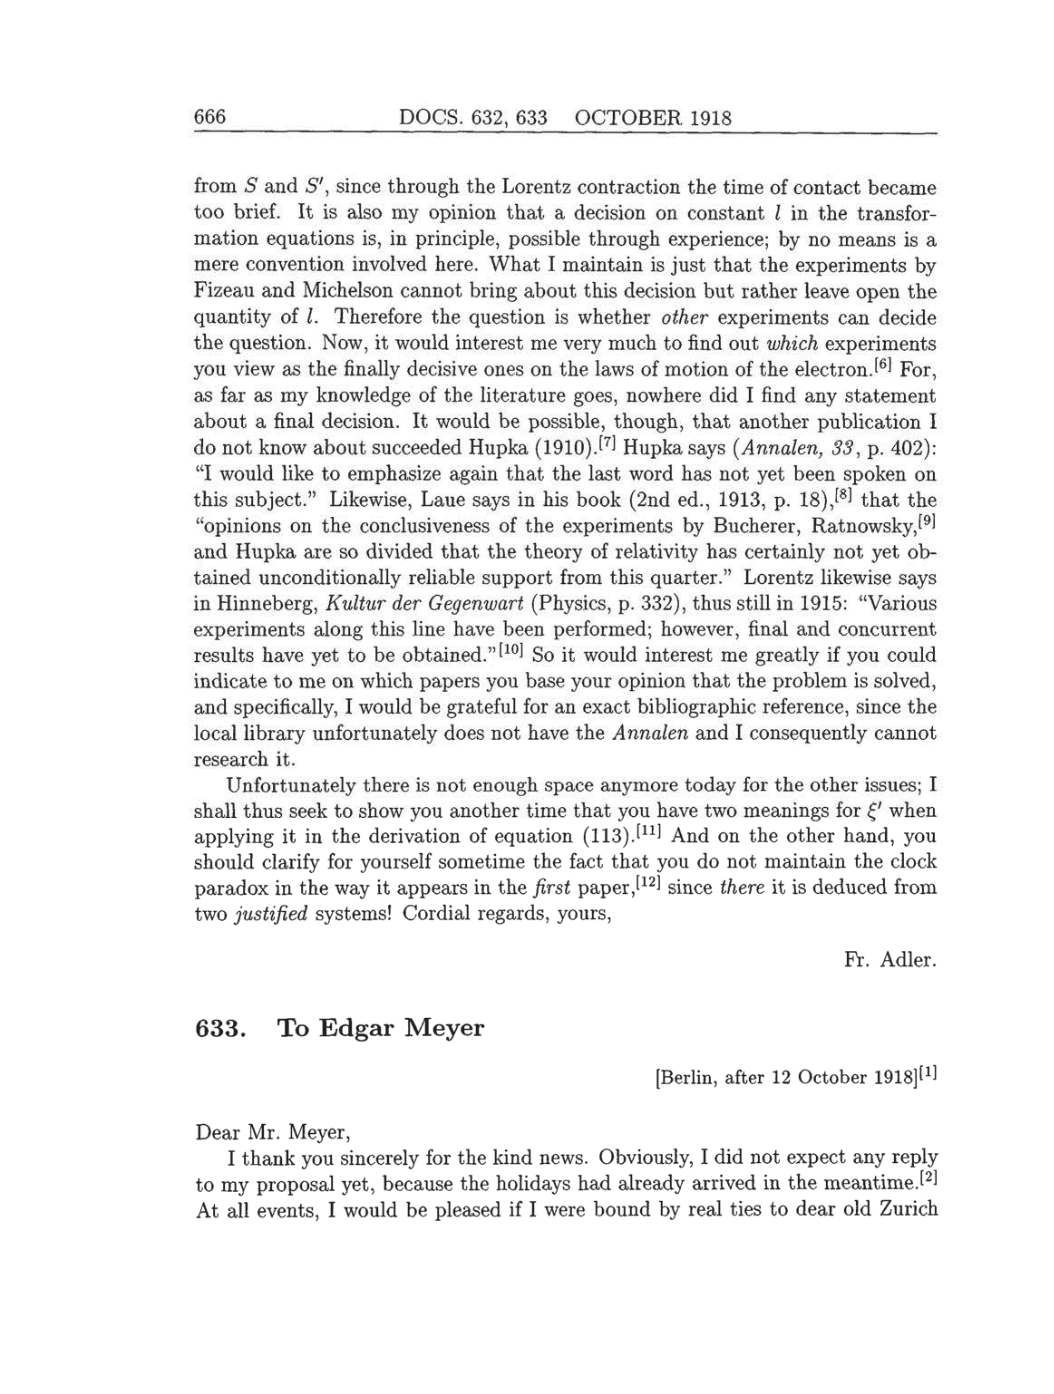 Volume 8: The Berlin Years: Correspondence, 1914-1918 (English translation supplement) page 666